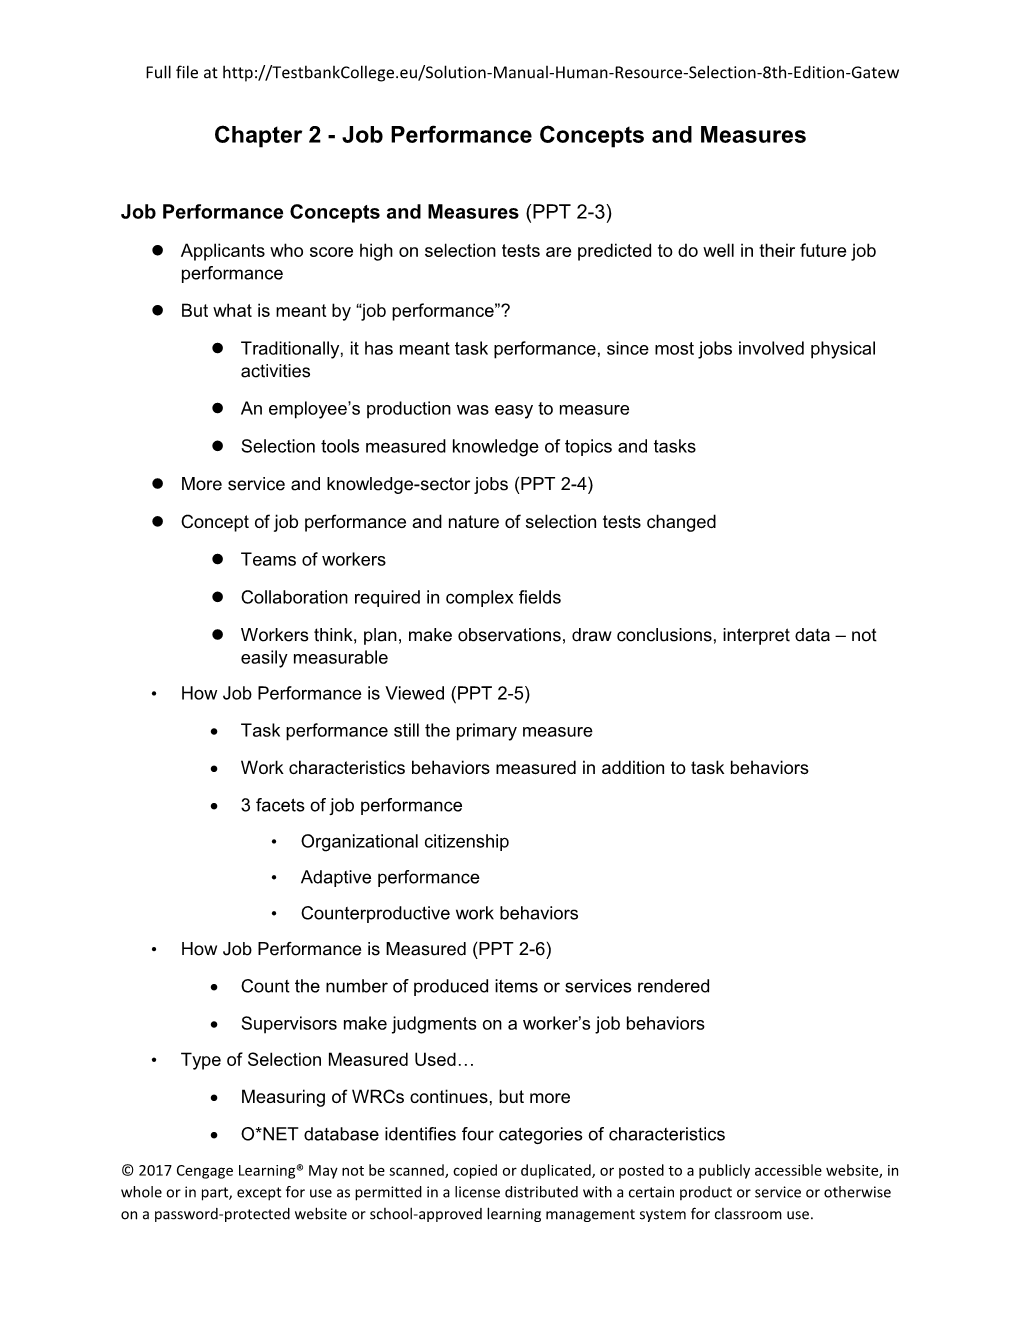 Chapter 2 - Job Performance Concepts and Measures